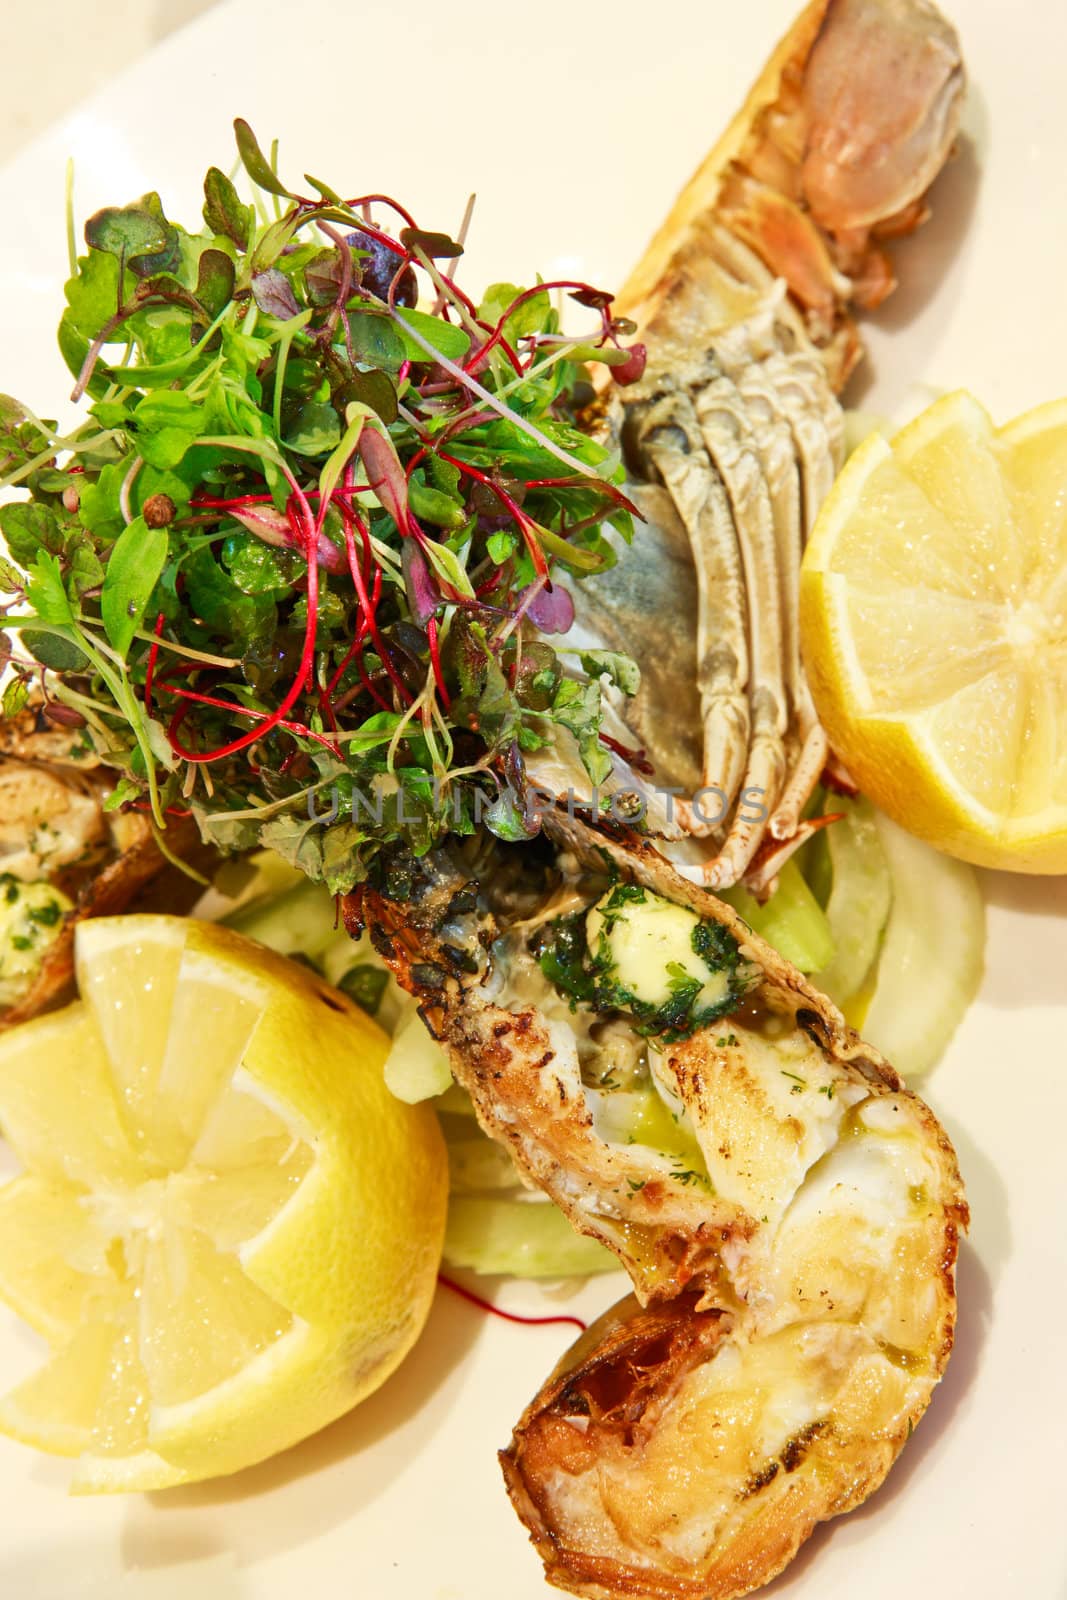 Delicious gourmet seafood meal with a boiled or grilled crayfish served with lemon and fresh herb salad